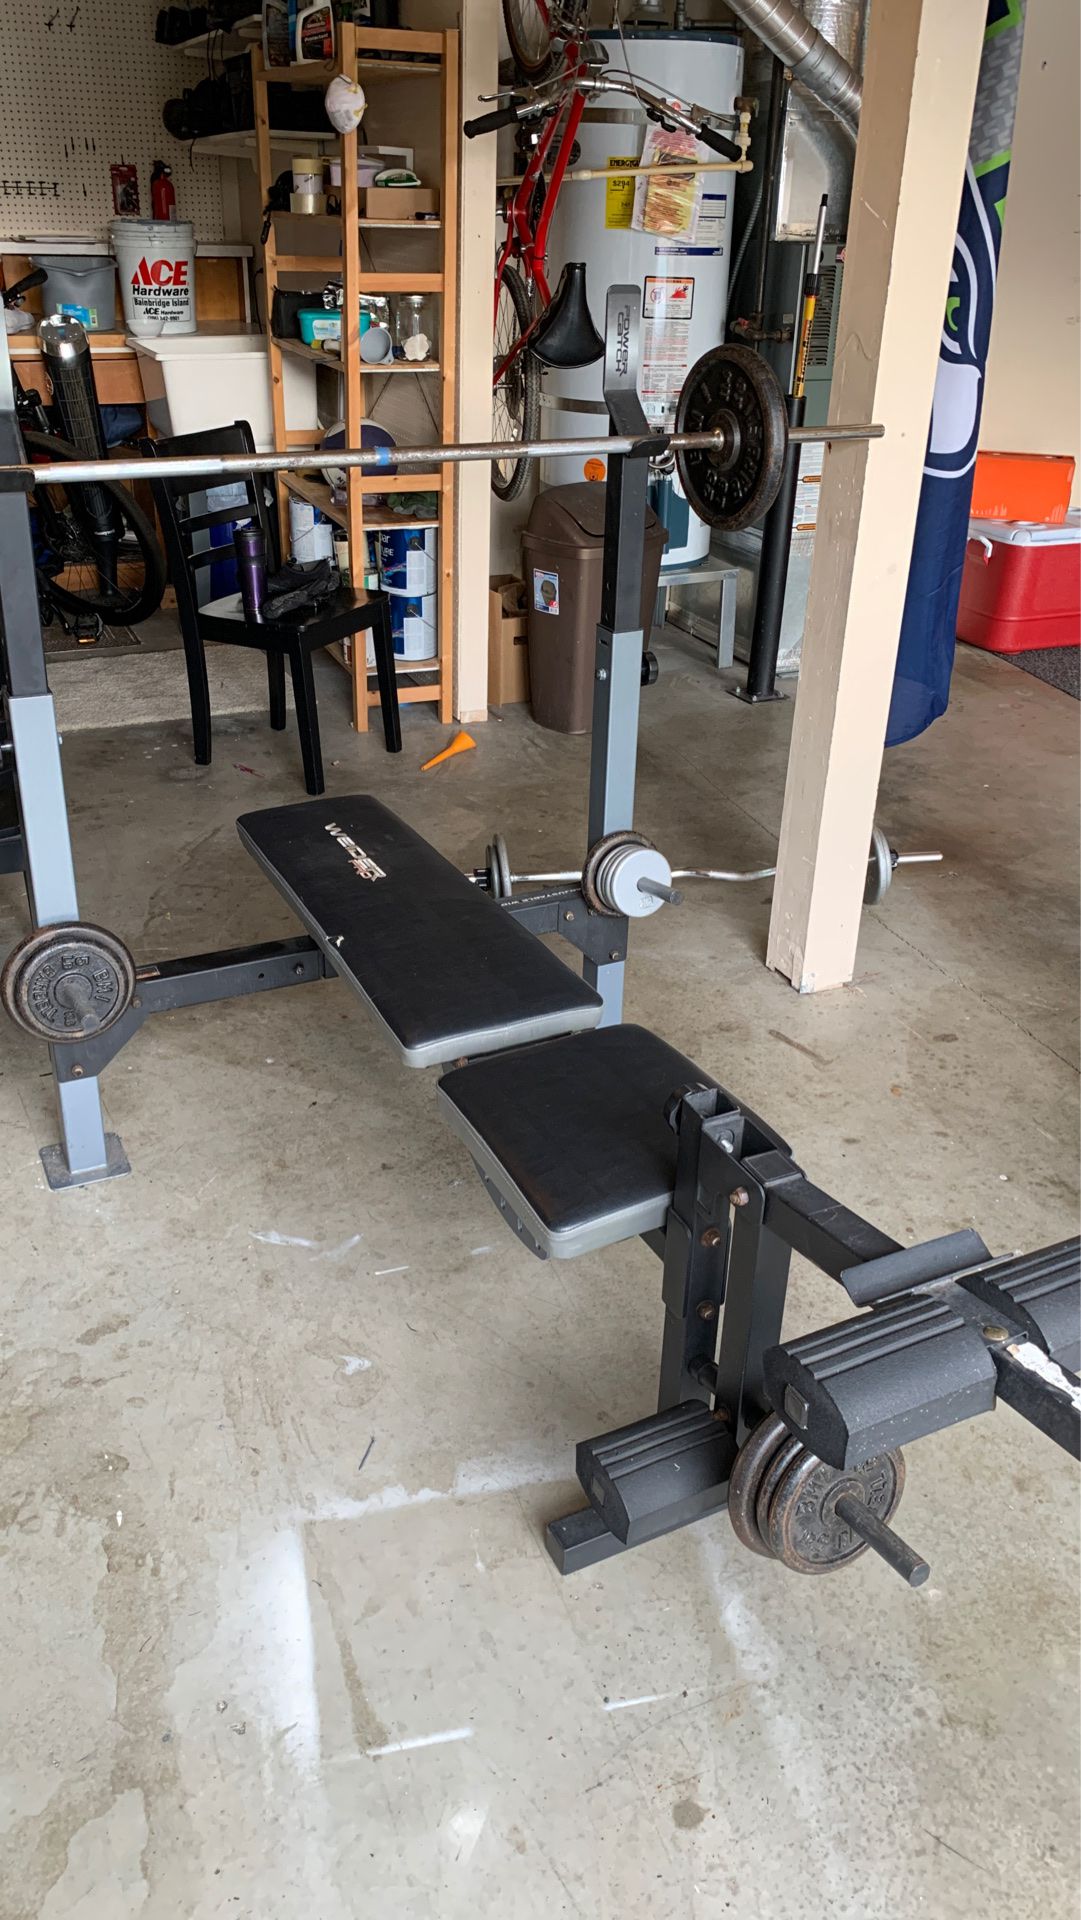 Gym equipment all in good condition